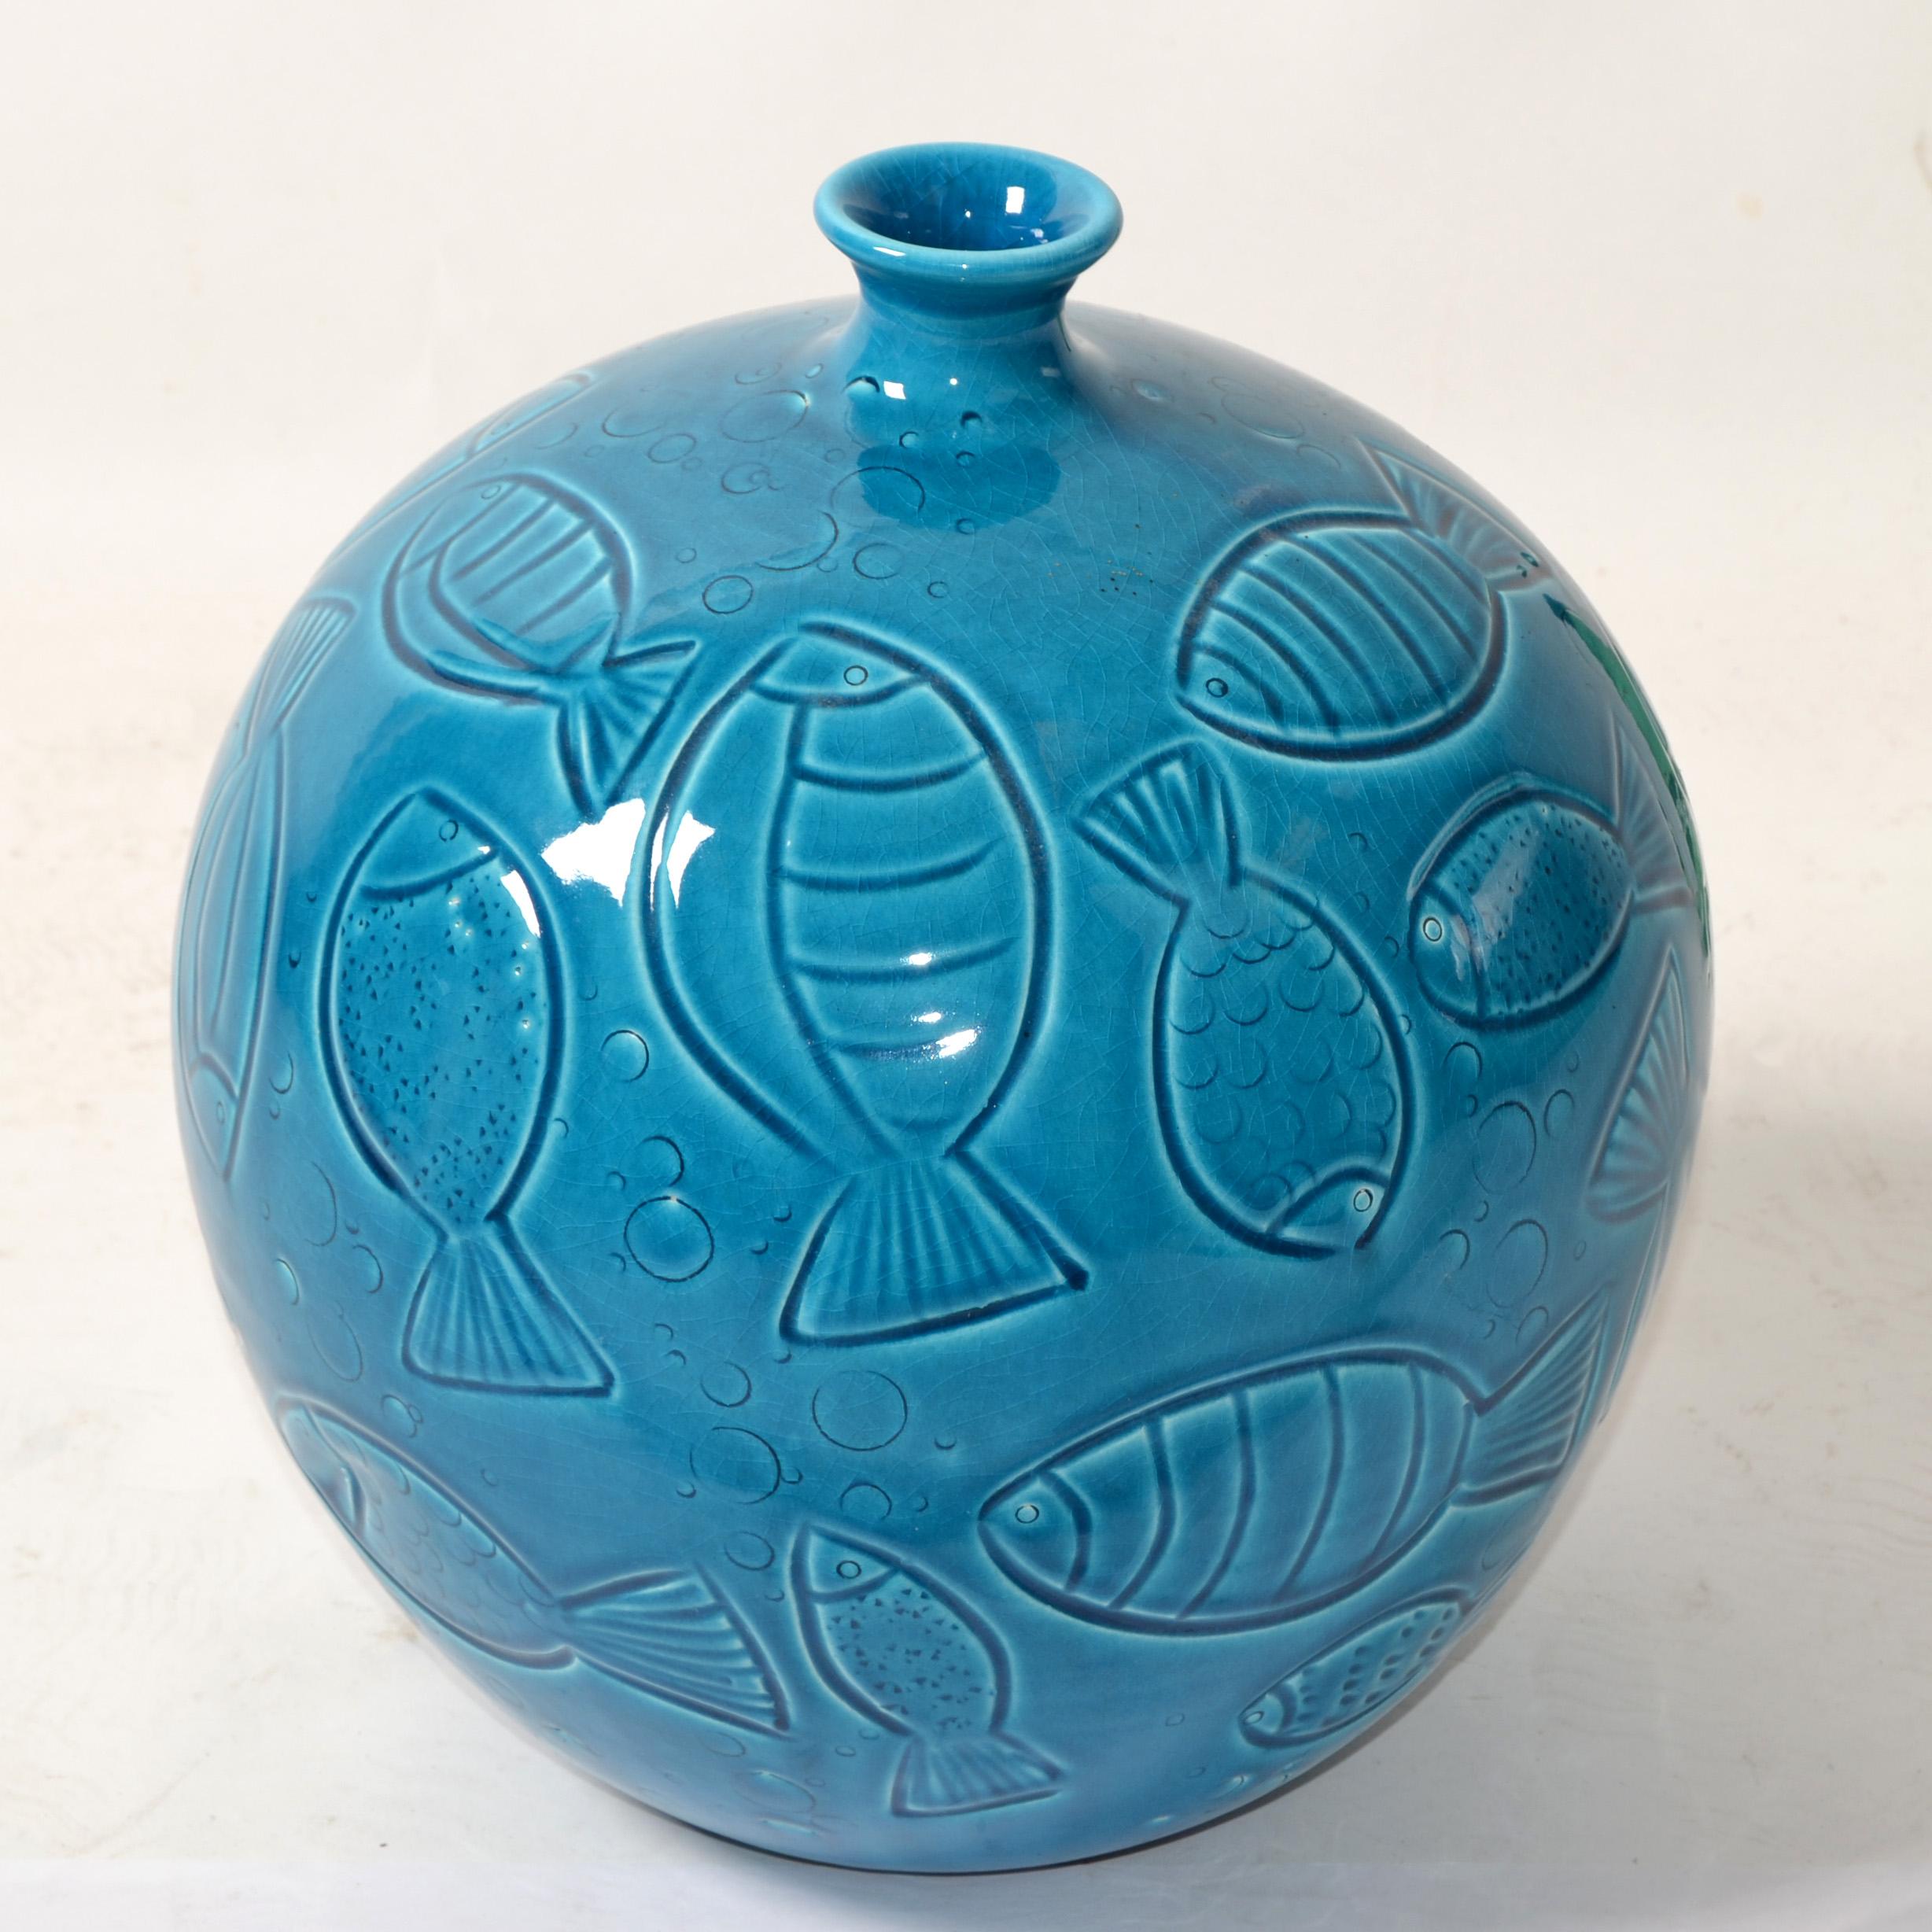 Marked Azur Blue Italy Pottery Vase Round Fish Vase Ceramiche Tadinate Handmade Pottery Coastal Living Home Decor.
Marked with the Ceramiche Tadinate Trademark, Made in Italy.
Beautiful Nautical Turquoise Ocean Clay Fine Art Vase.       
Opening